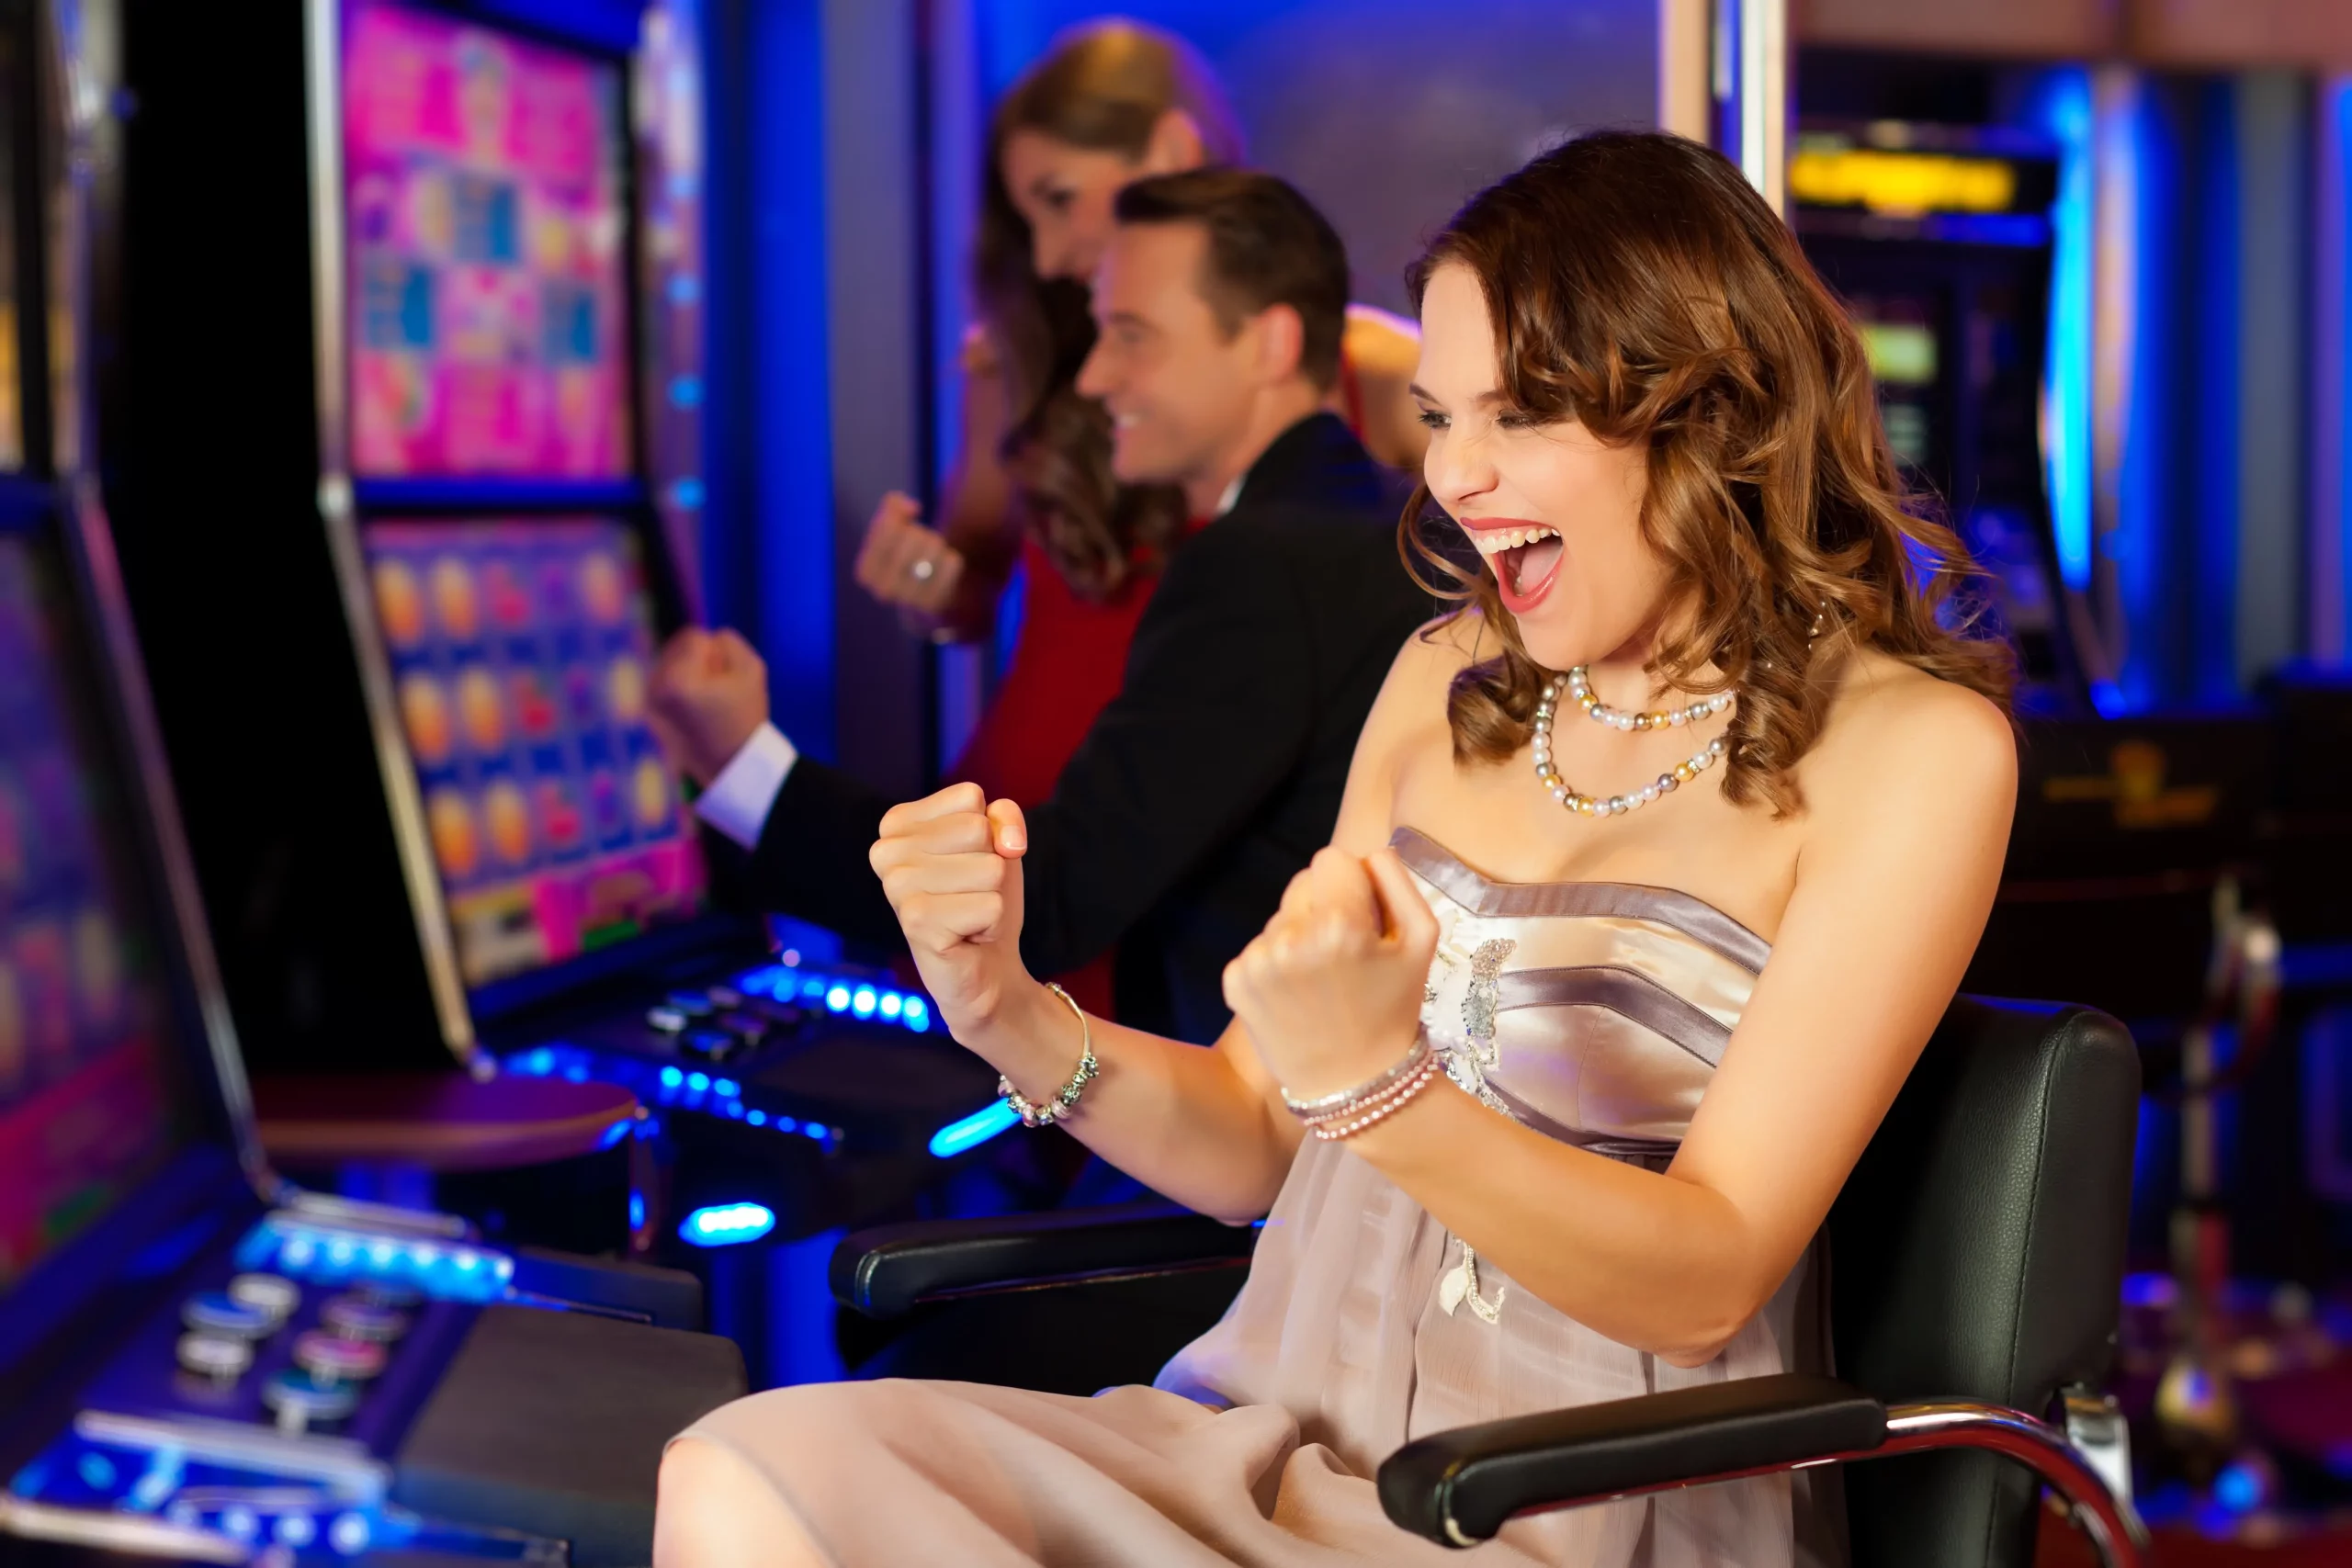 Do You Want to Gamble Online for Real Money? Here’s How to Do It!